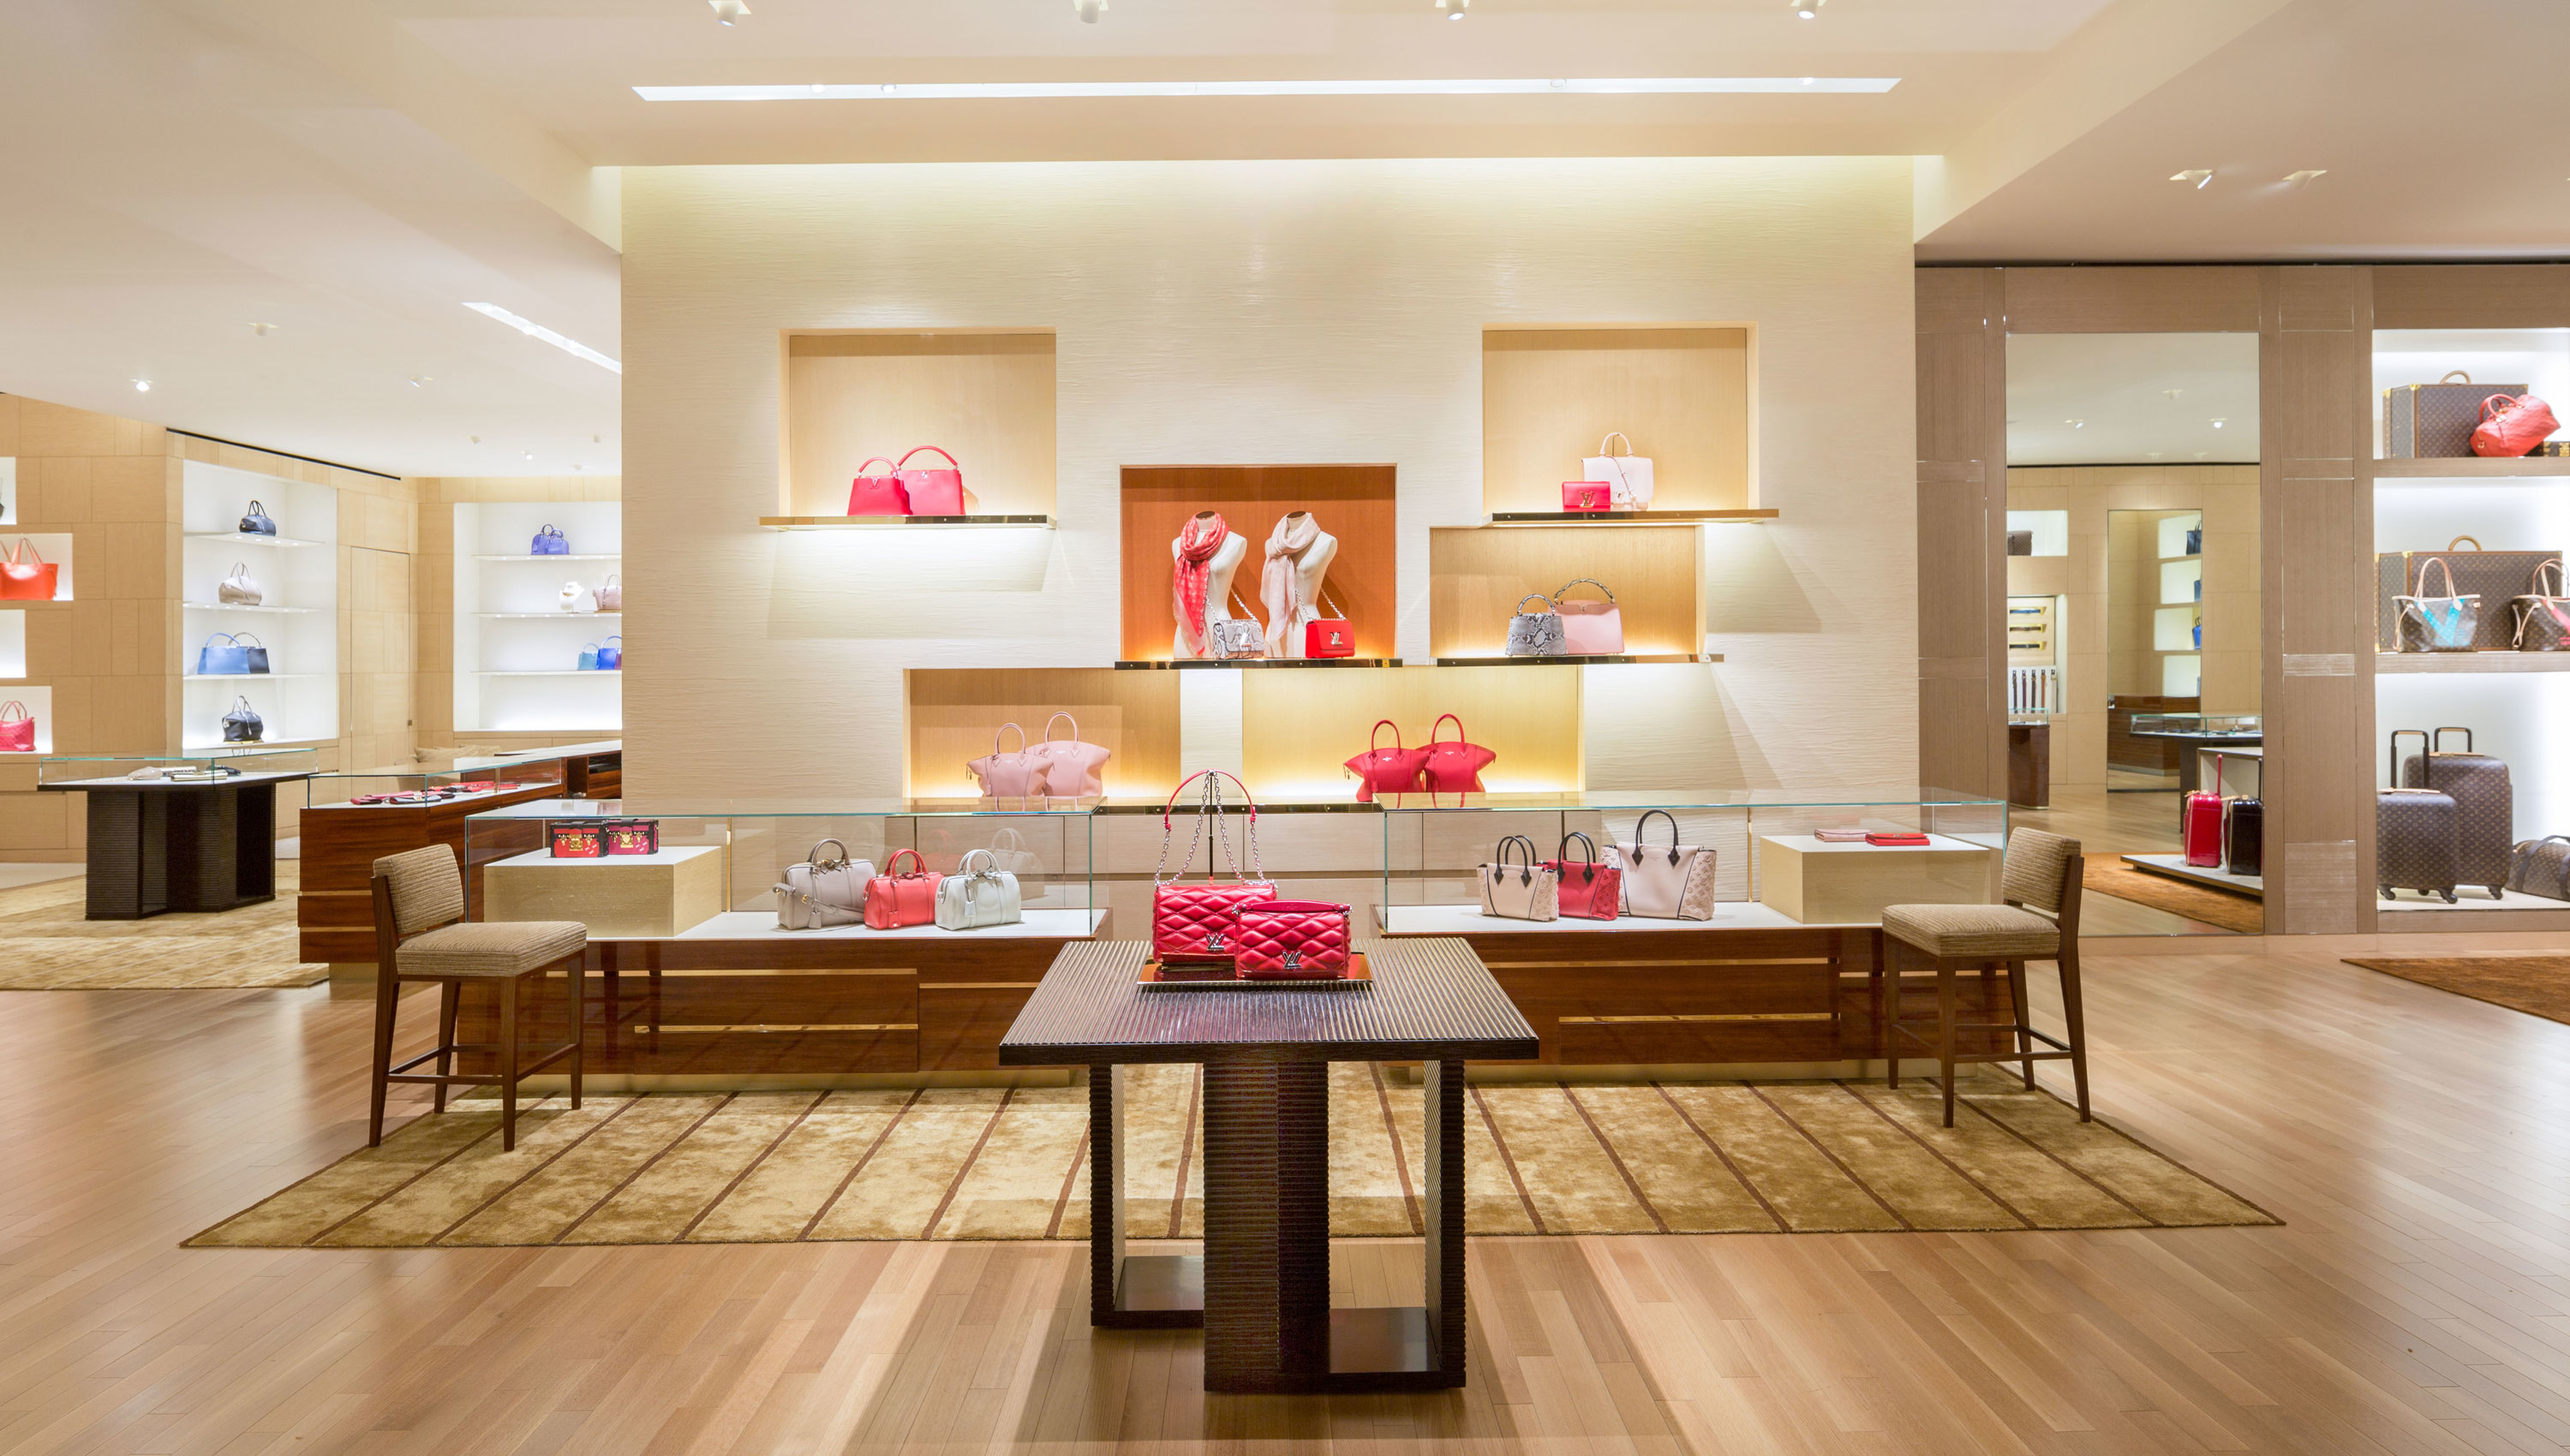 Louis Vuitton Oakbrook Store Il | Confederated Tribes of the Umatilla Indian Reservation